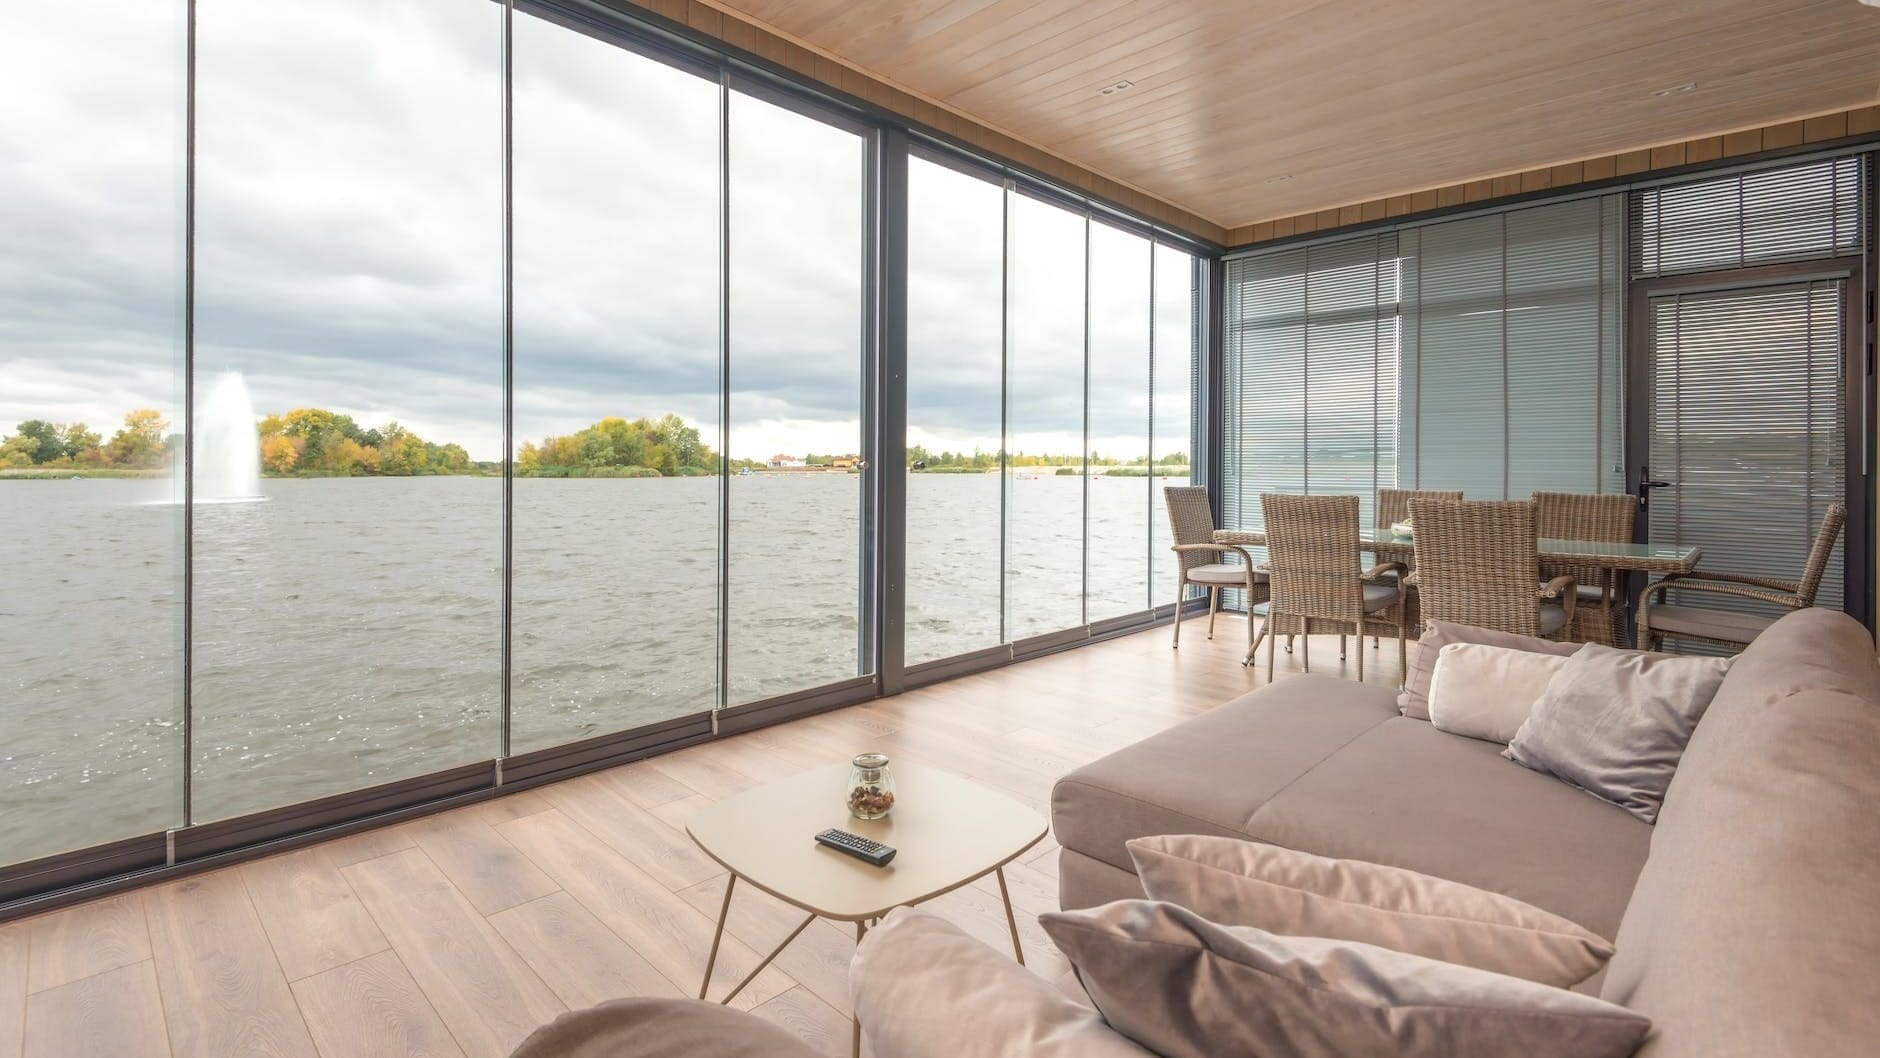 interior of contemporary house on lake on cloudy day, good for choosing the right automated blinds for million-dollar homes